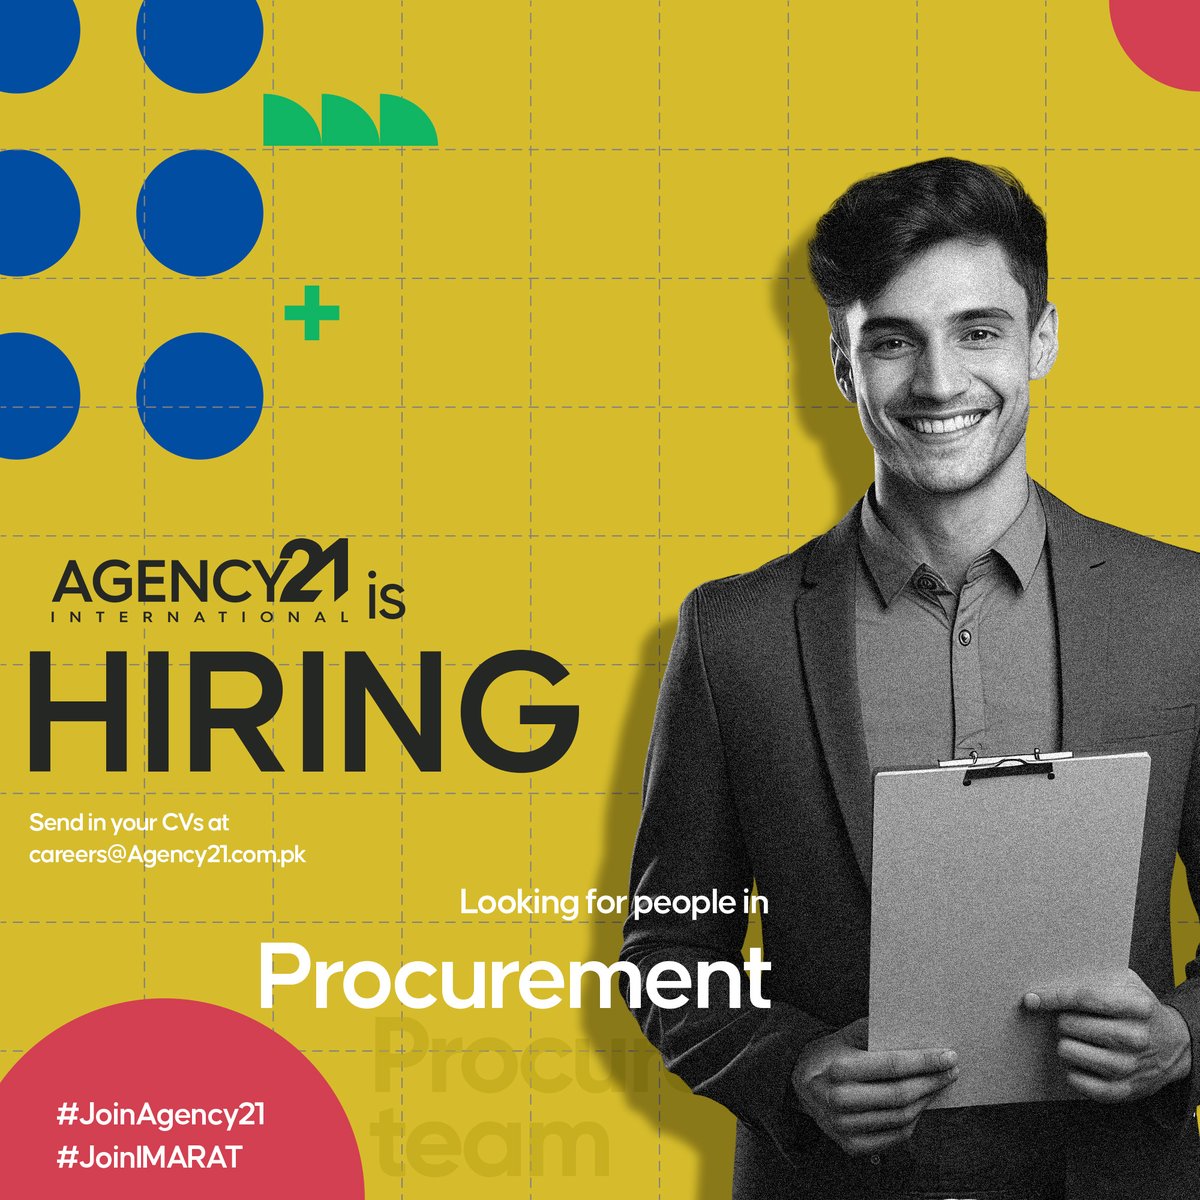 Join the Procurement Team at Agency21! We're looking for individuals skilled in sourcing the best for our projects. #ProcurementJobs #JoinAgency21